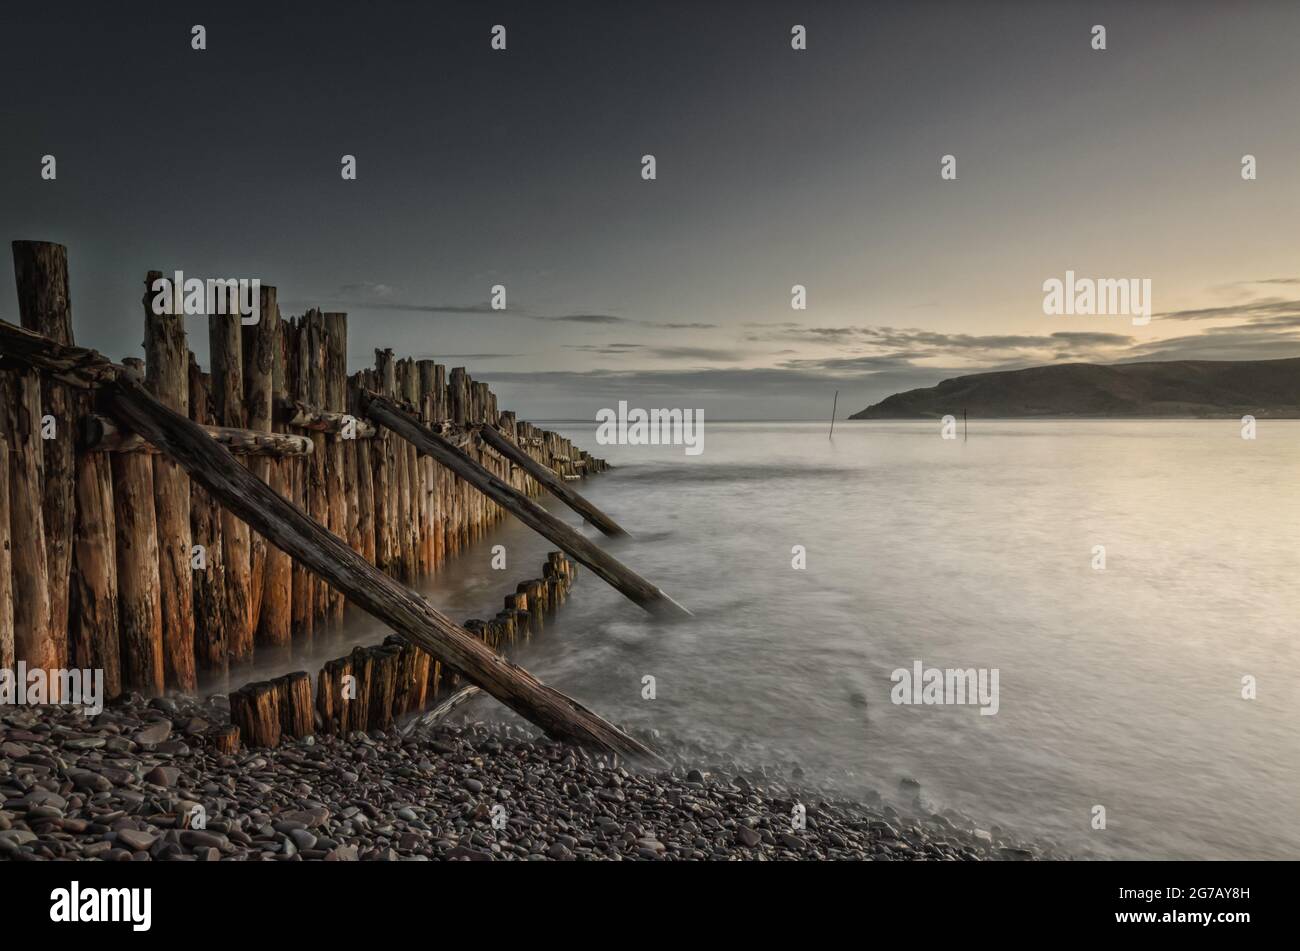 Old wooden groynes extending out from the shingle beach into the Bristol channel catching the pre-dawn light. A long exposure smooths out the water. Stock Photo